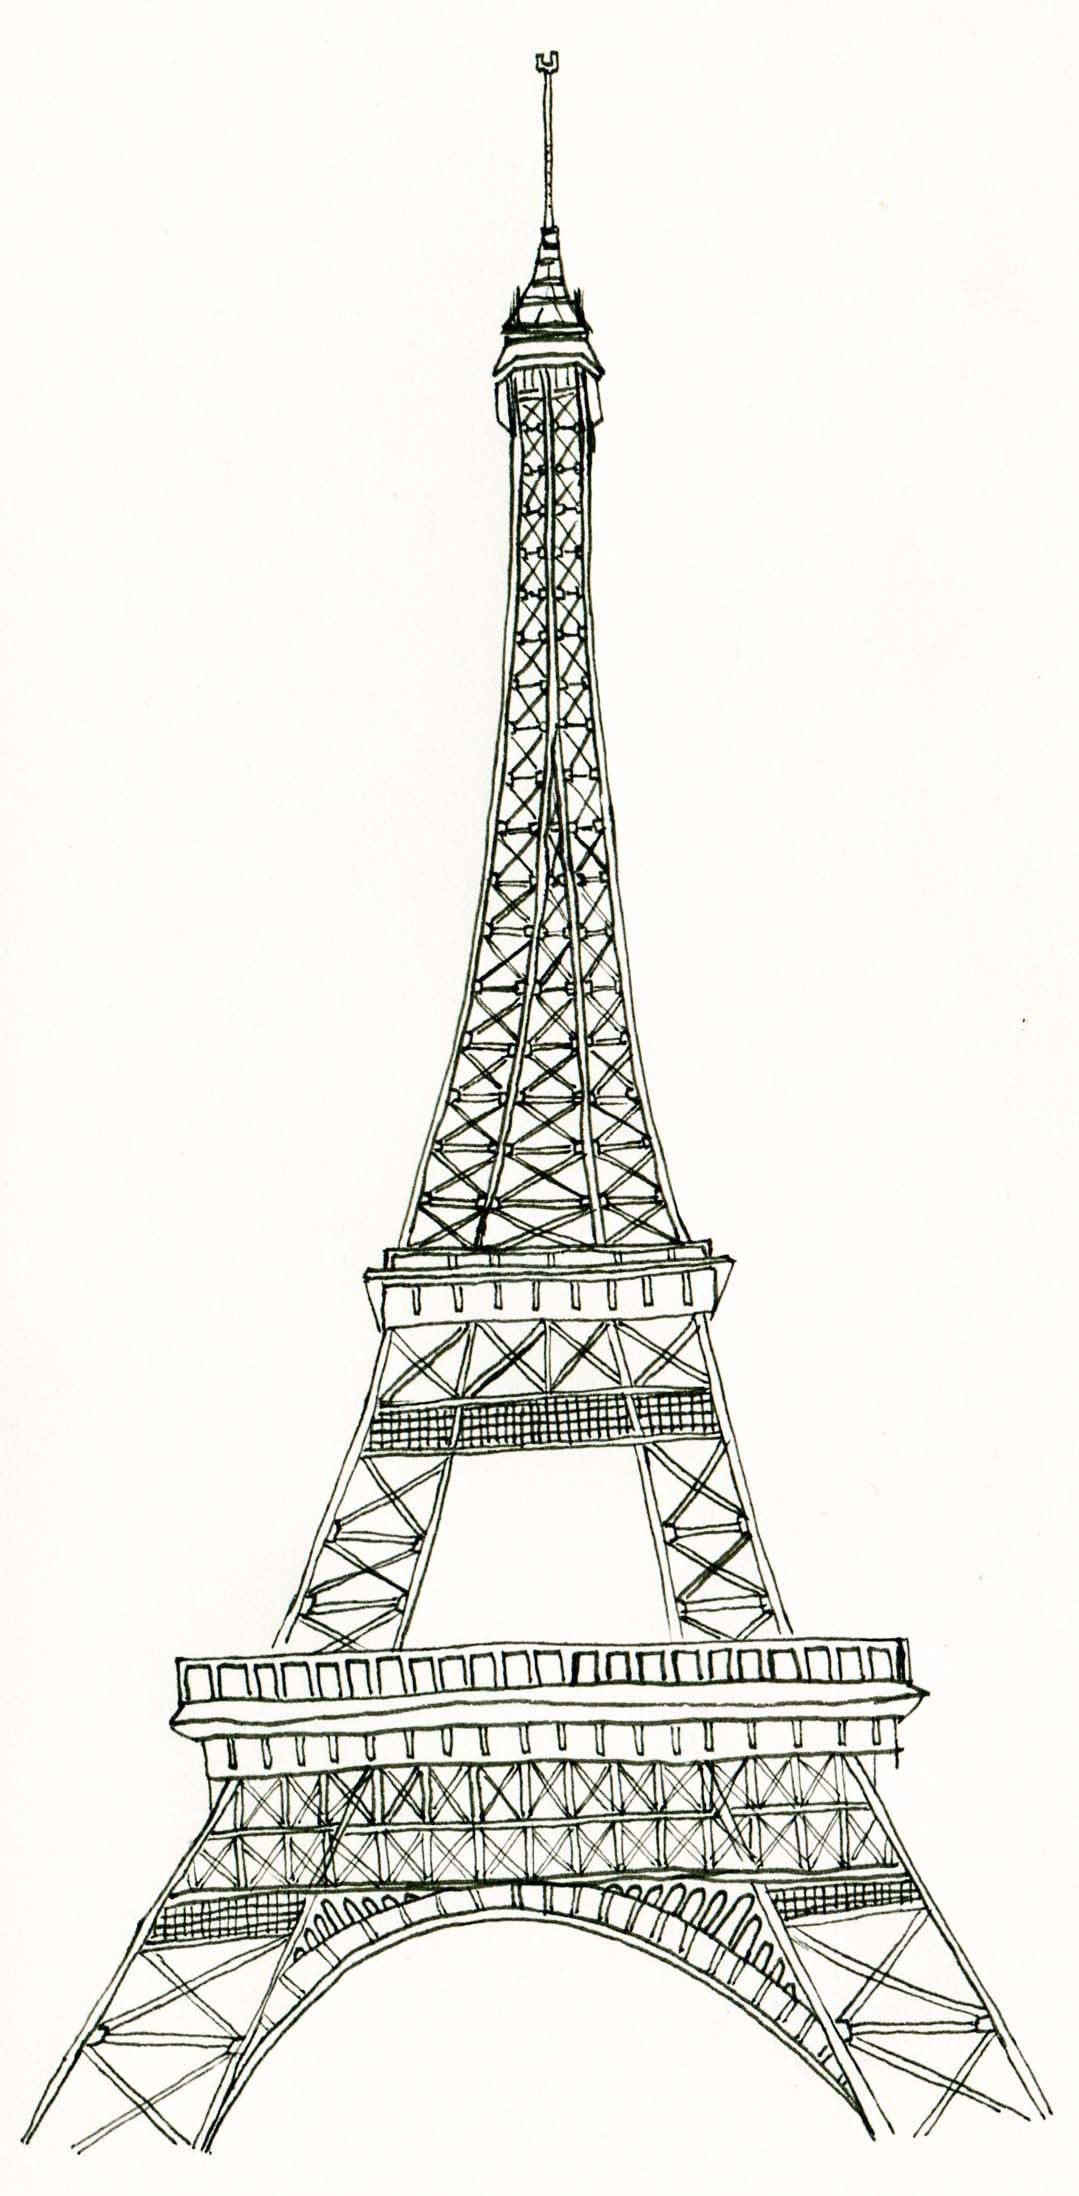 Somerset House - Images. EIFFEL TOWER SKETCH